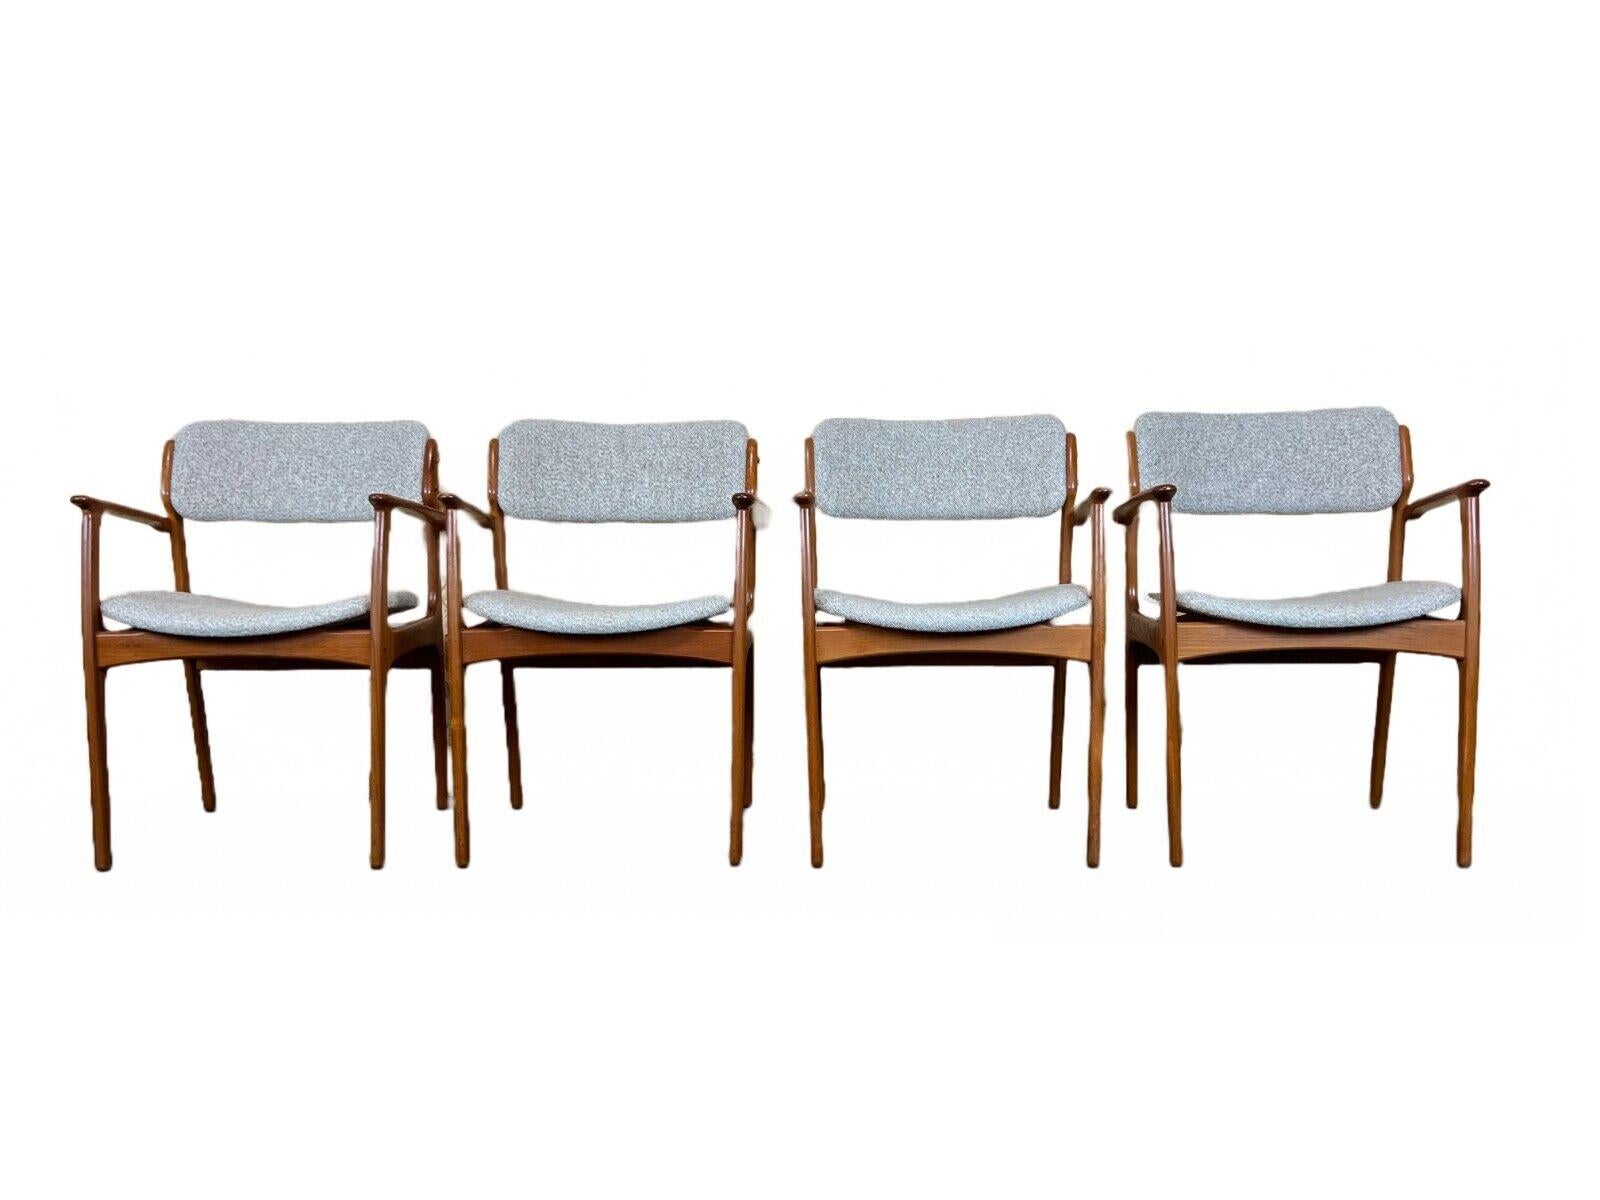 4x 60s 70s chairs teak dining chair armchair Erik Buck O.D. furniture

Object: 4x chair

Manufacturer: O.D. furniture

Condition: good - vintage

Age: around 1960-1970

Dimensions:

Width = 61cm
Depth = 54cm
Height = 80cm
Seat height